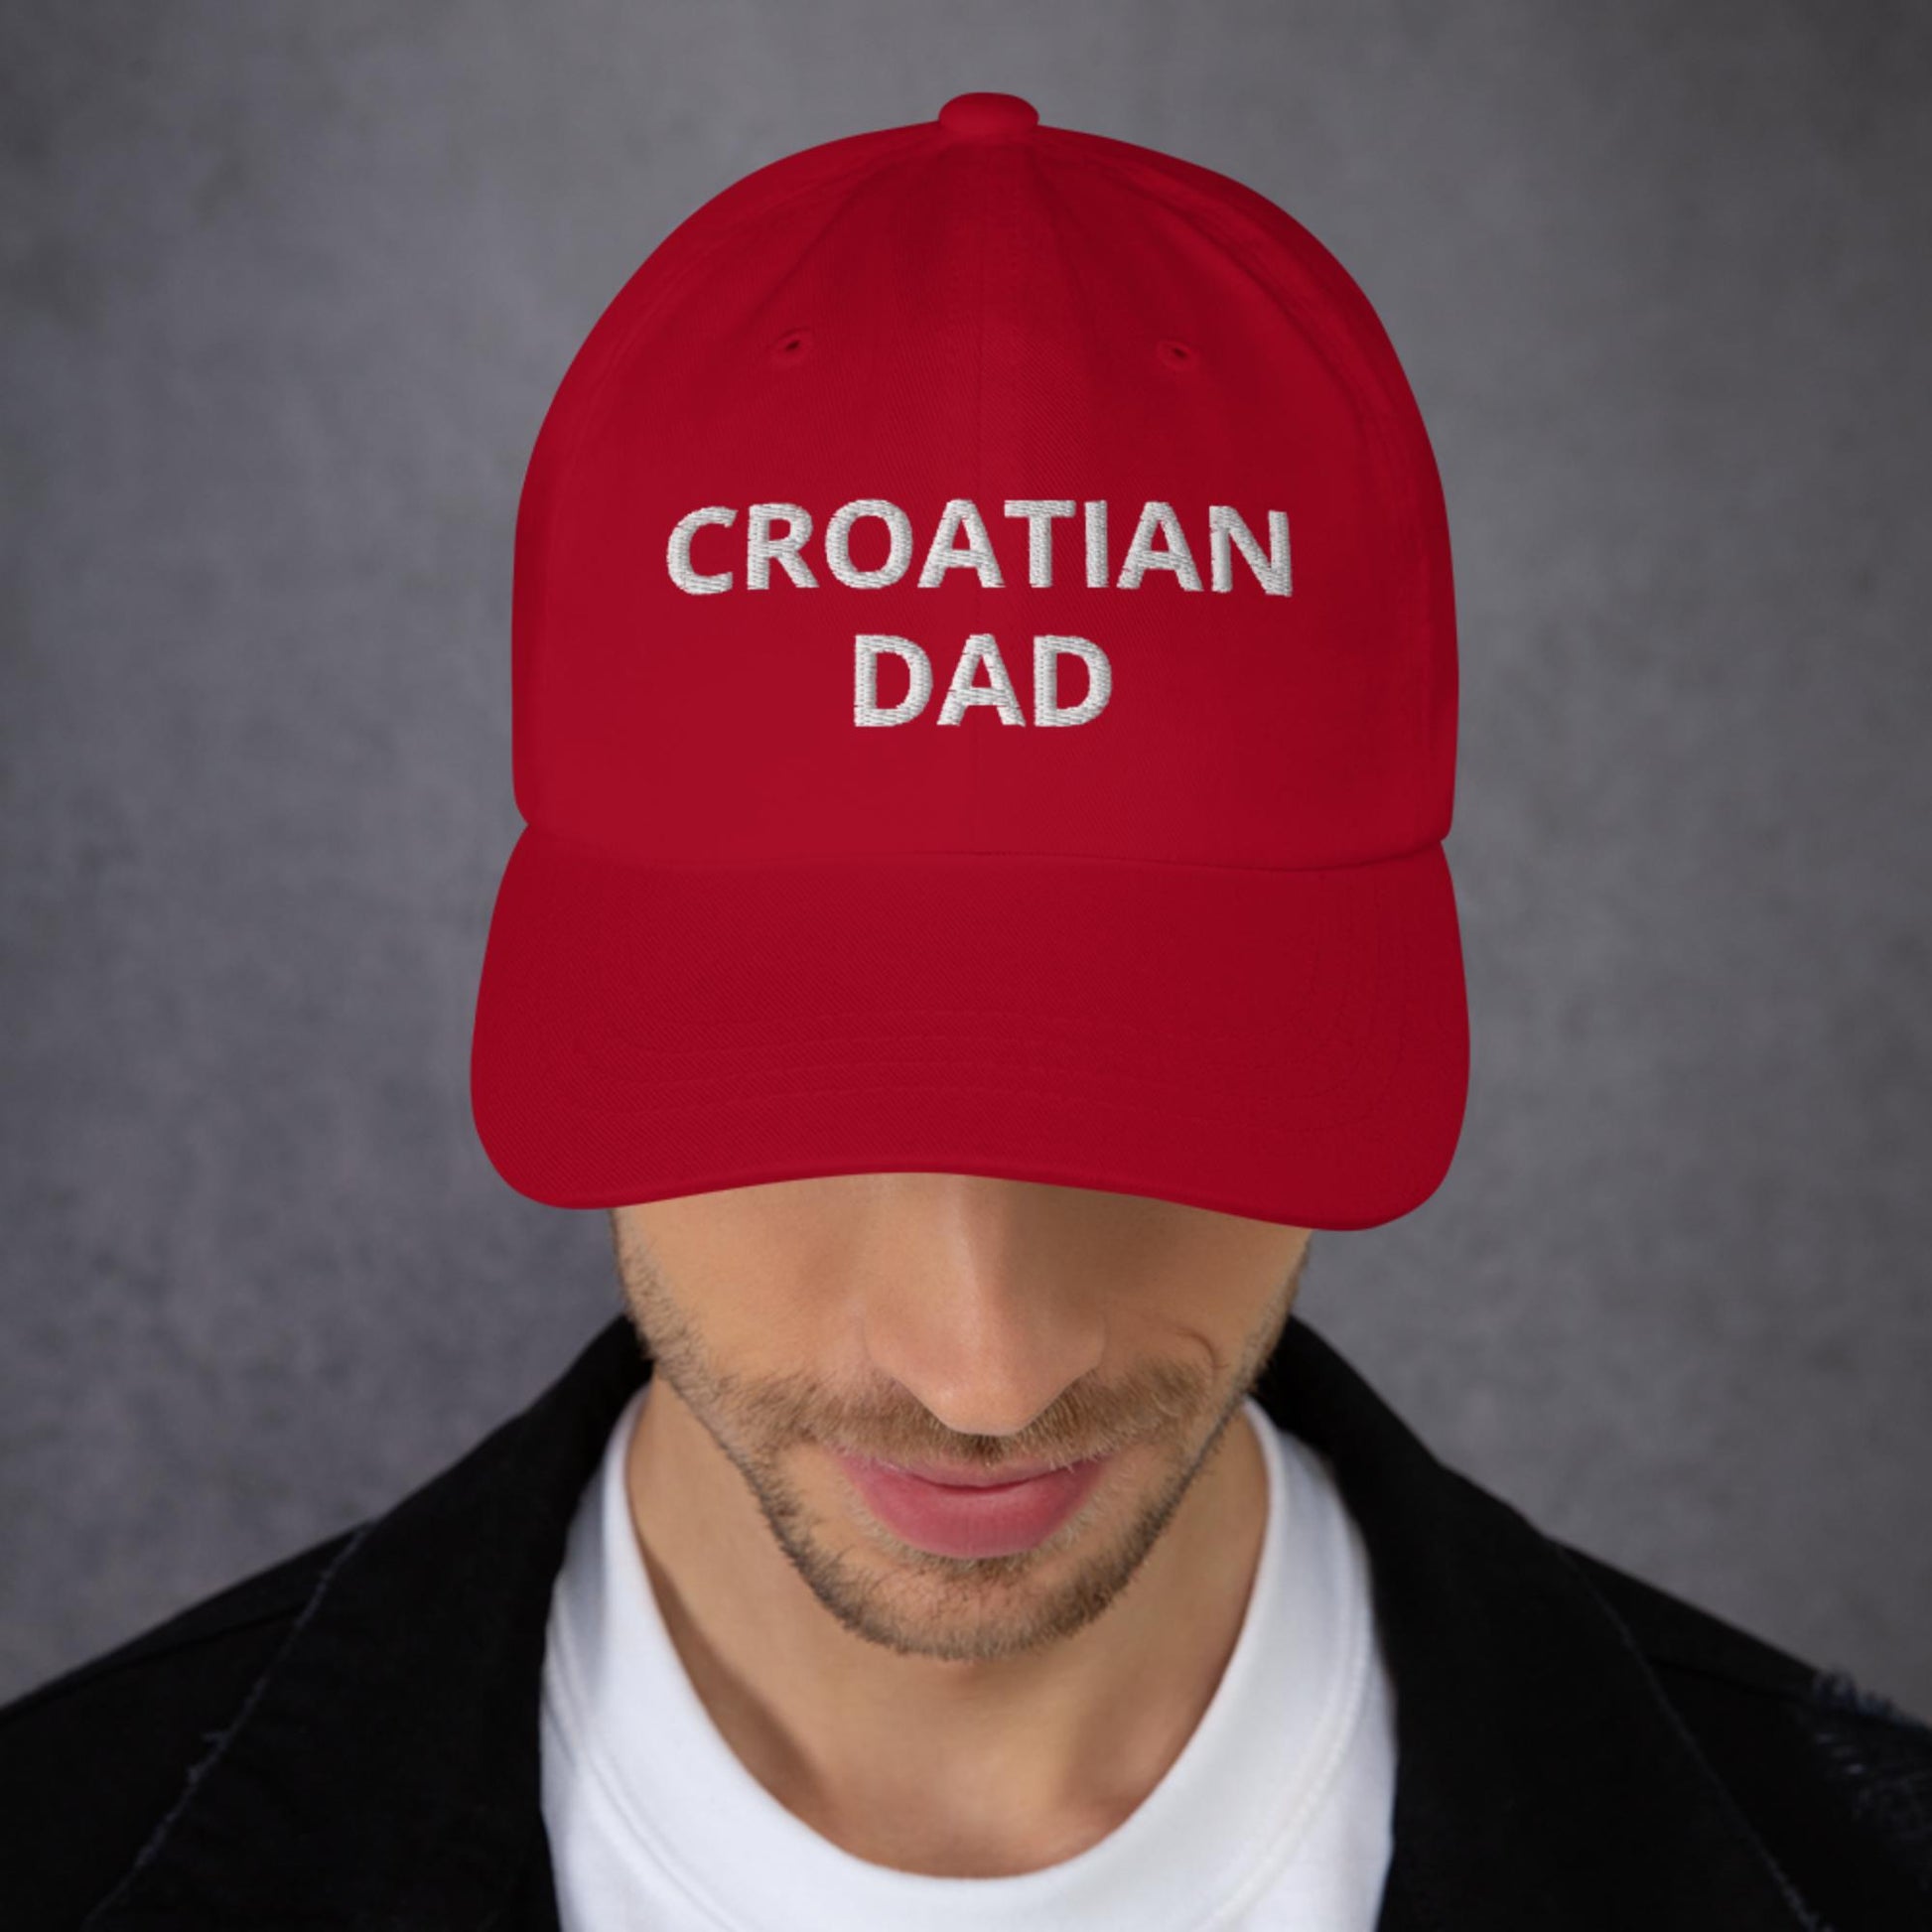 Croatian Dad Hat - Embrace Your Heritage with Style